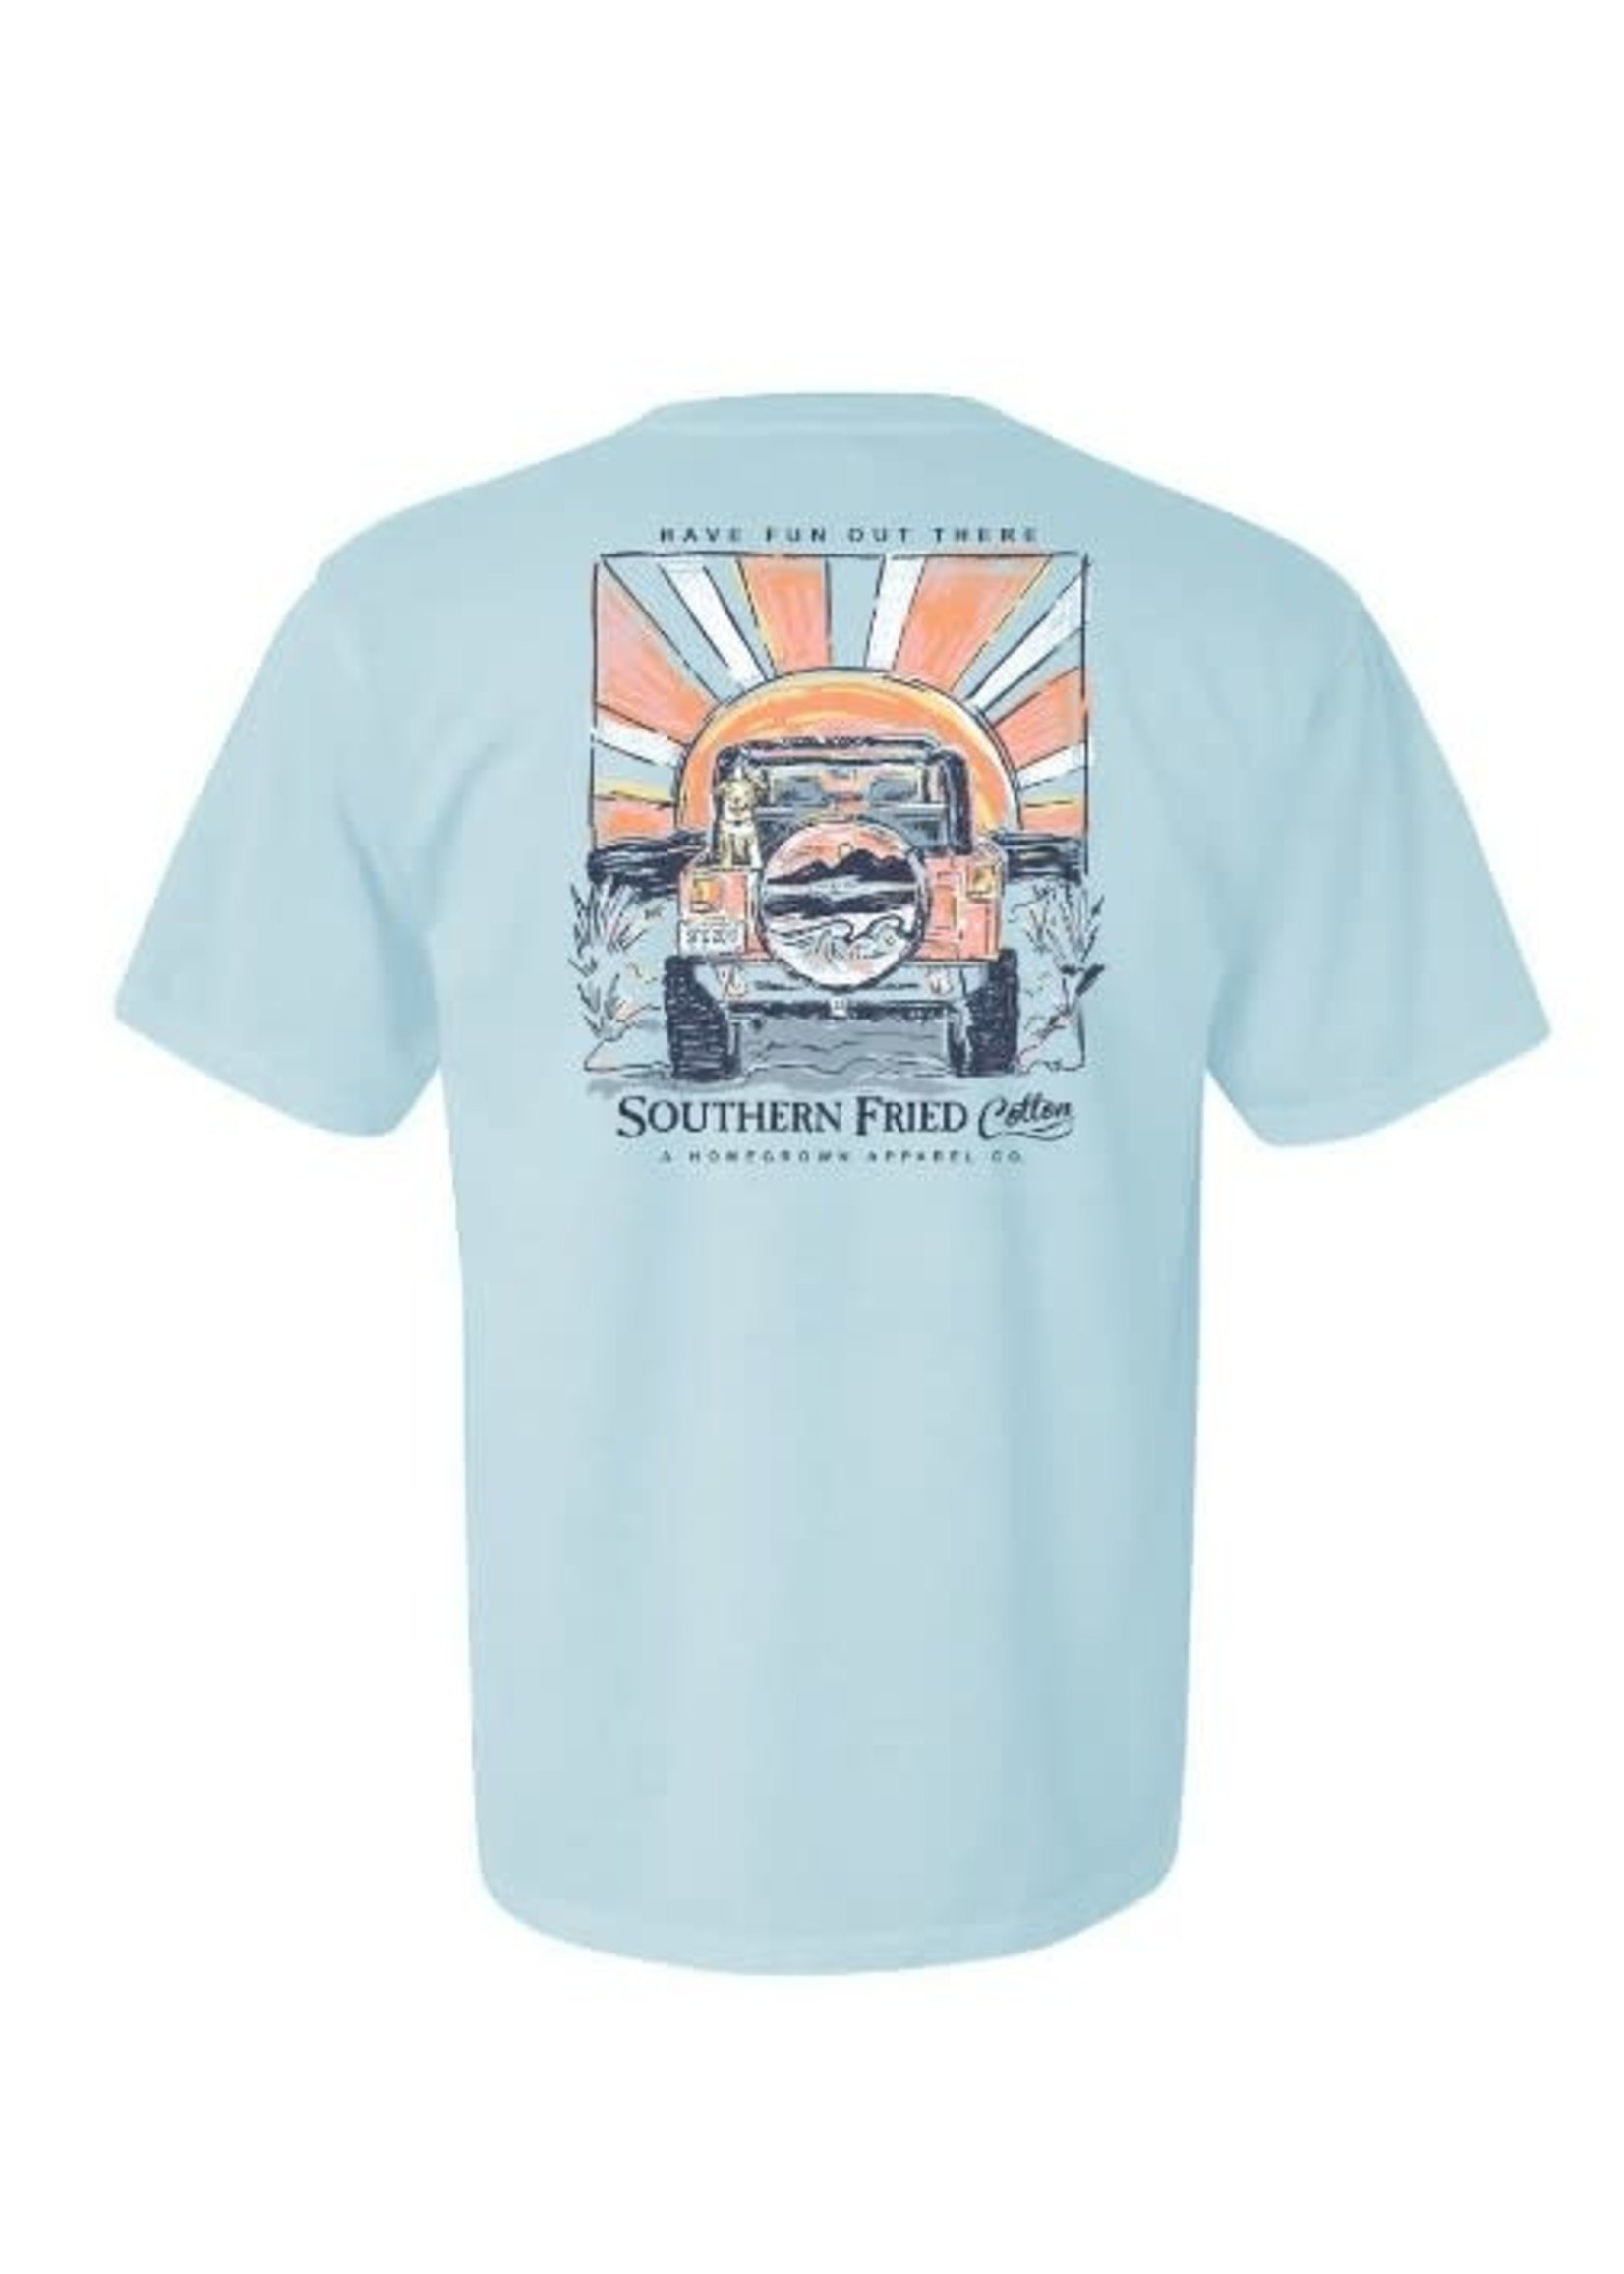 Southern Fried Cotton Have Fun